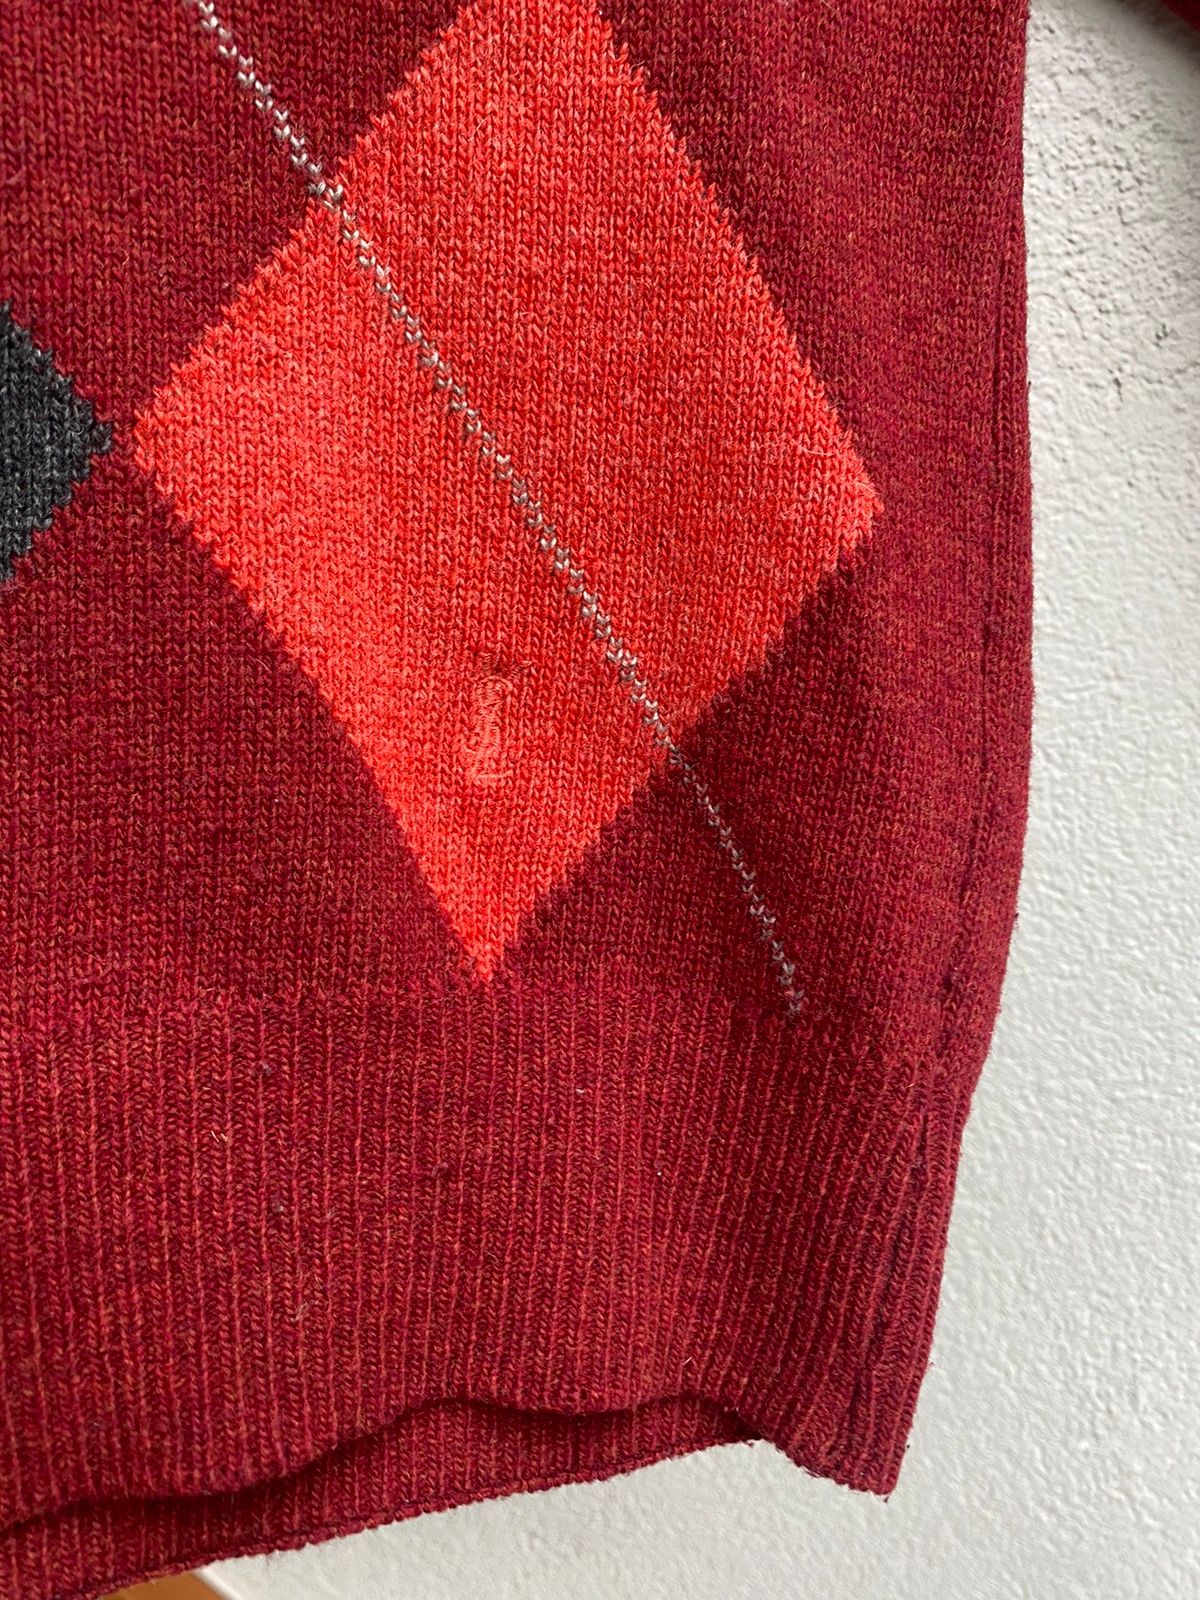 Vintage 🇮🇹italy 90’s YSL Sweater Wool Knit Soft Size US L / EU 52-54 / 3 - 4 Thumbnail